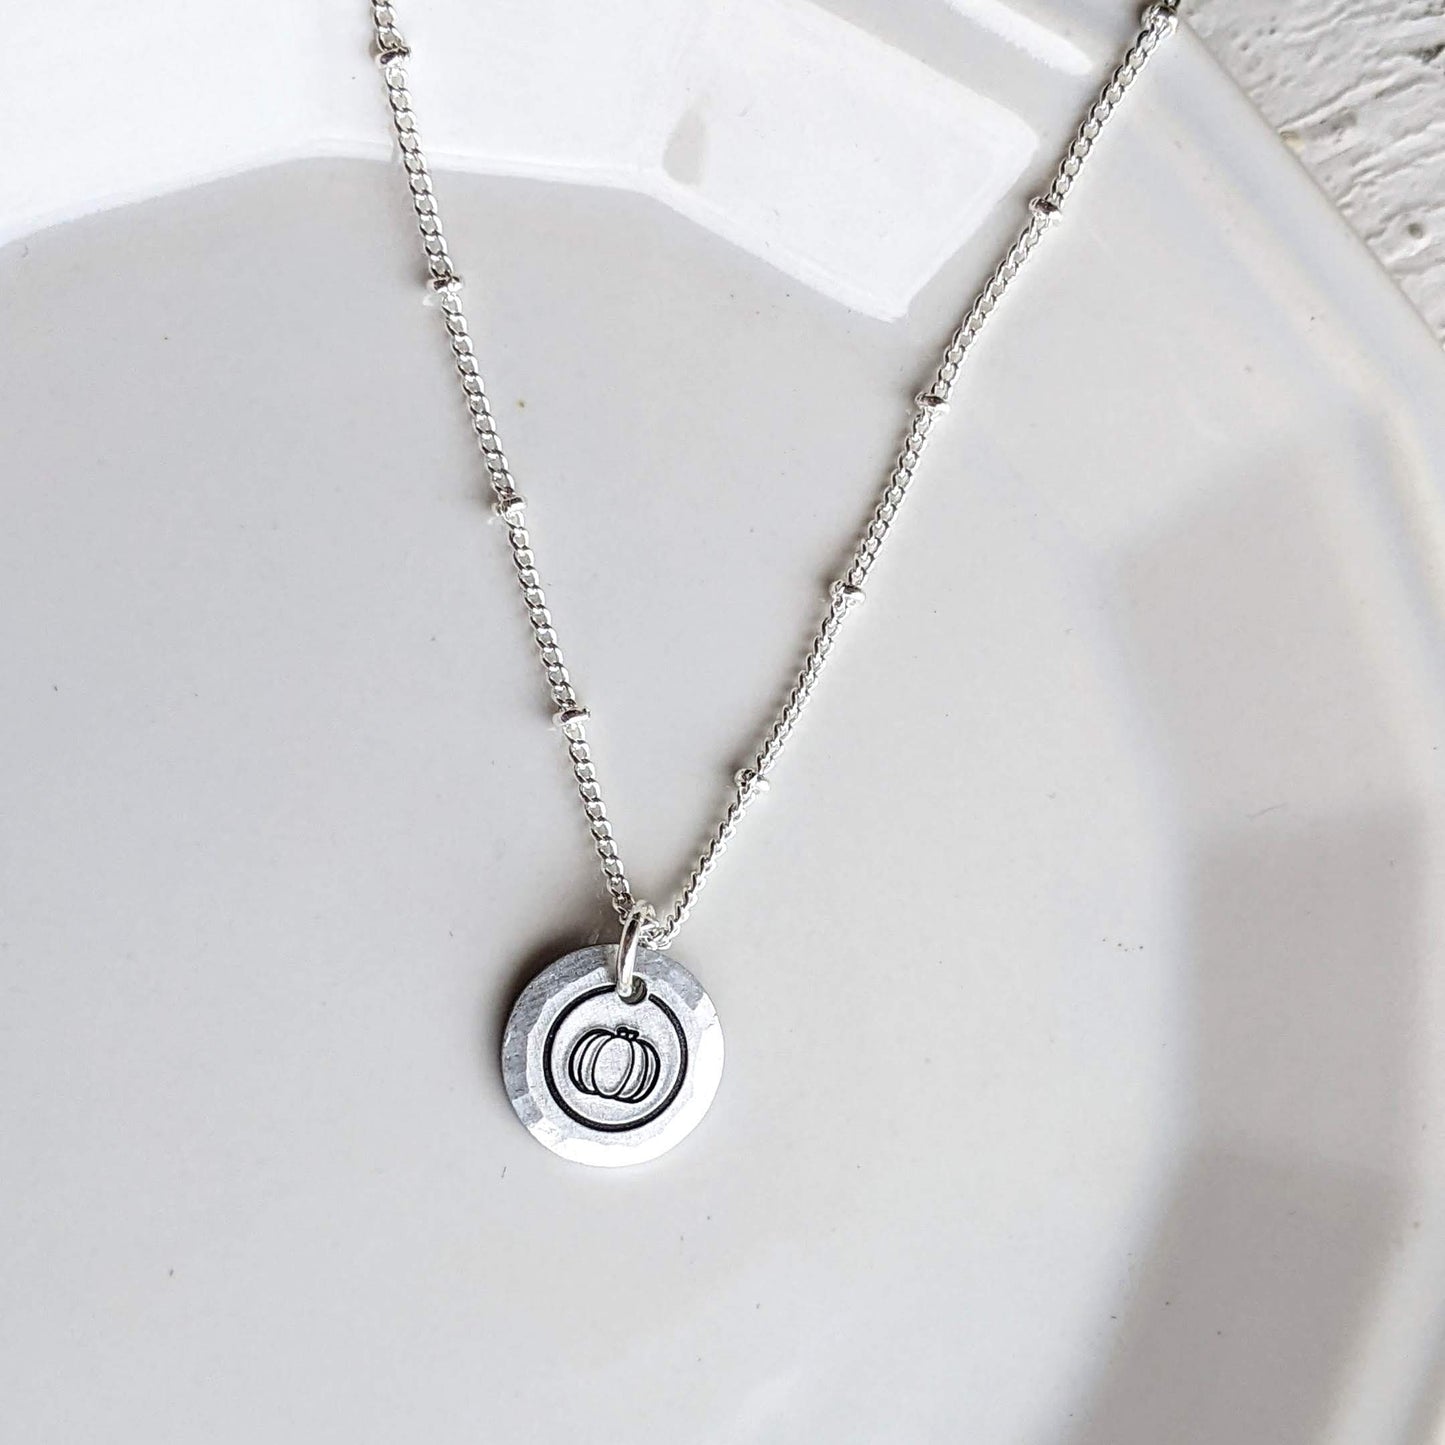 Pumpkin Circle Necklace - Gold or Silver Satellite Chain